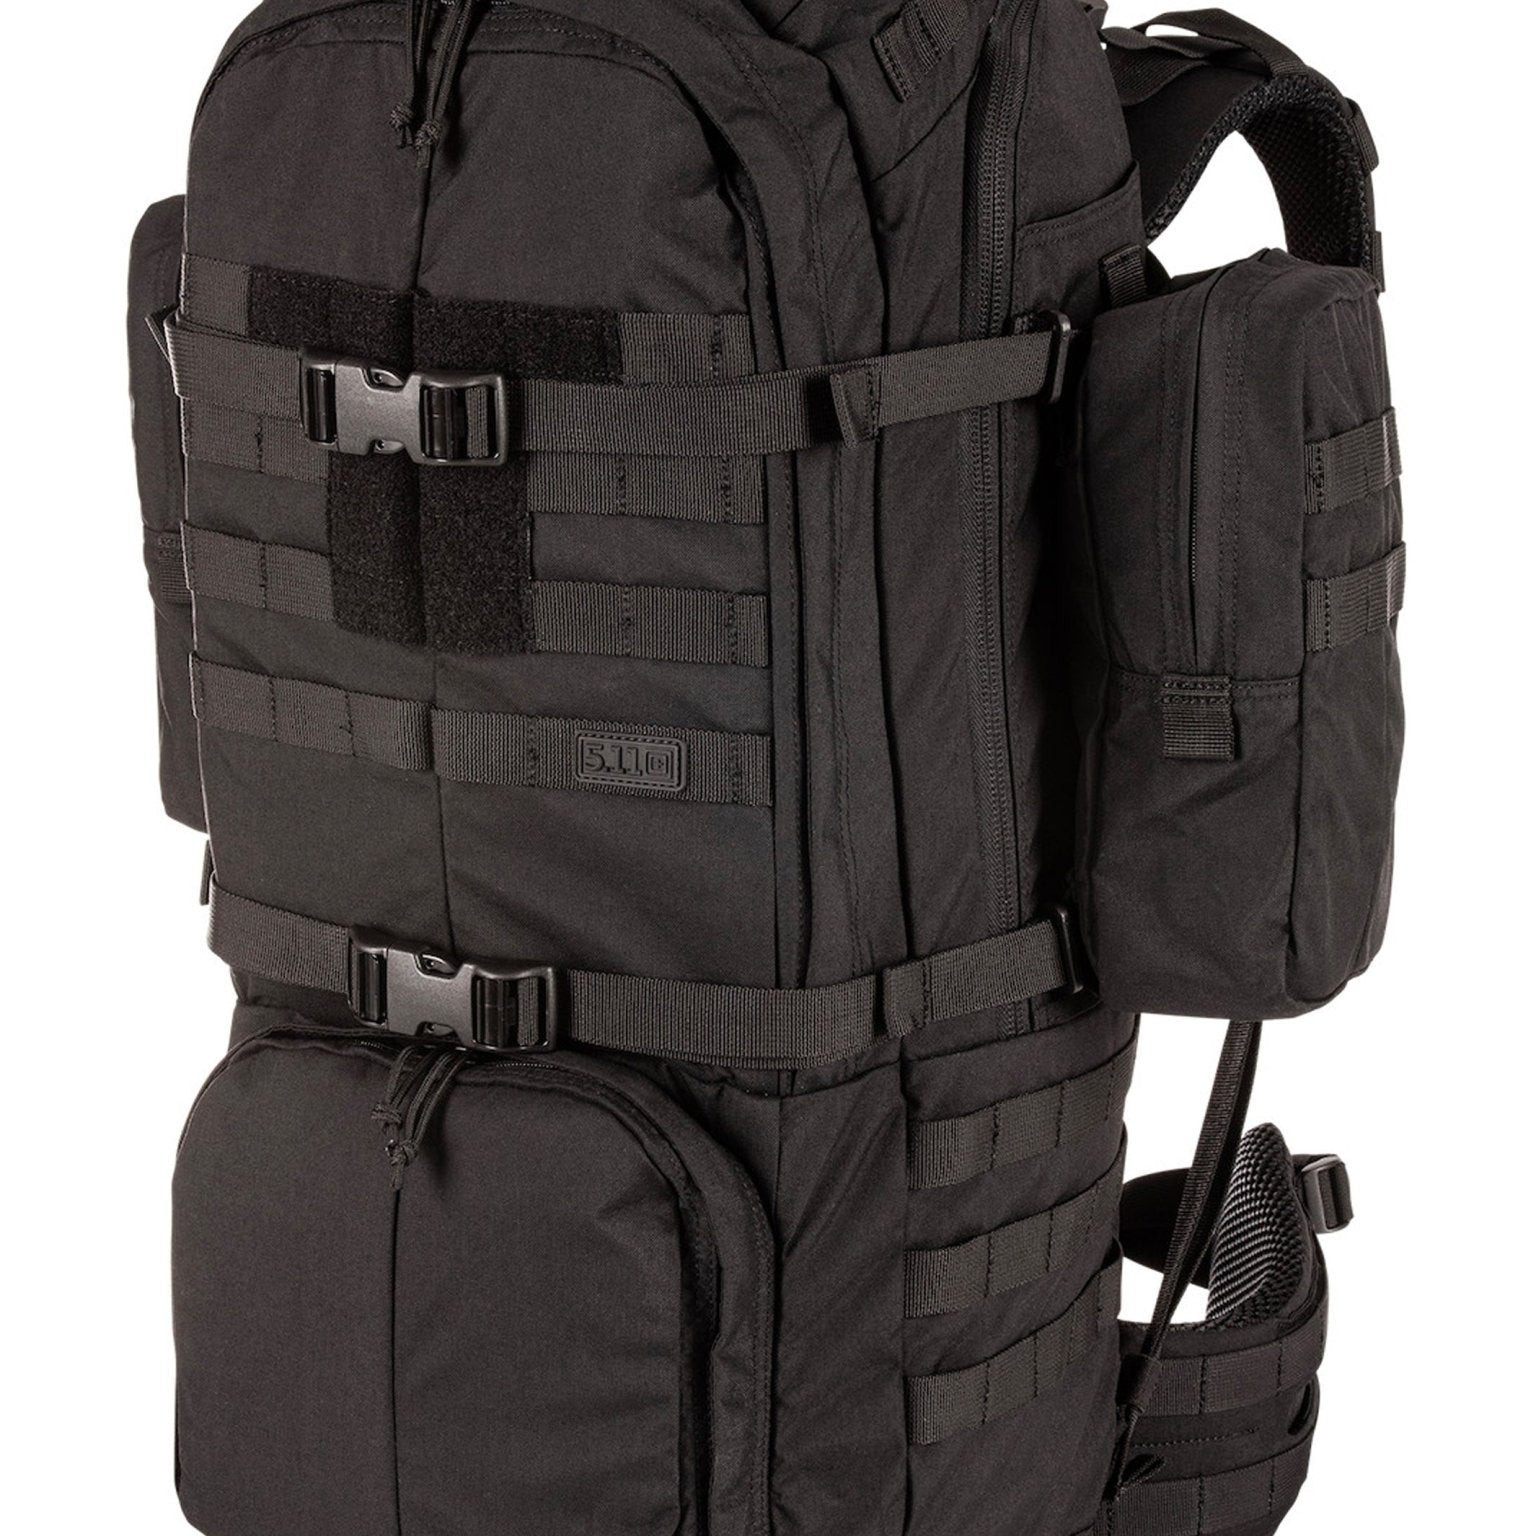 4elementsclothing5.11 Tactical5.11 Tactical - 5.11 Tactical Rush 100 60L Backpack - Style 56555Bag56555-019